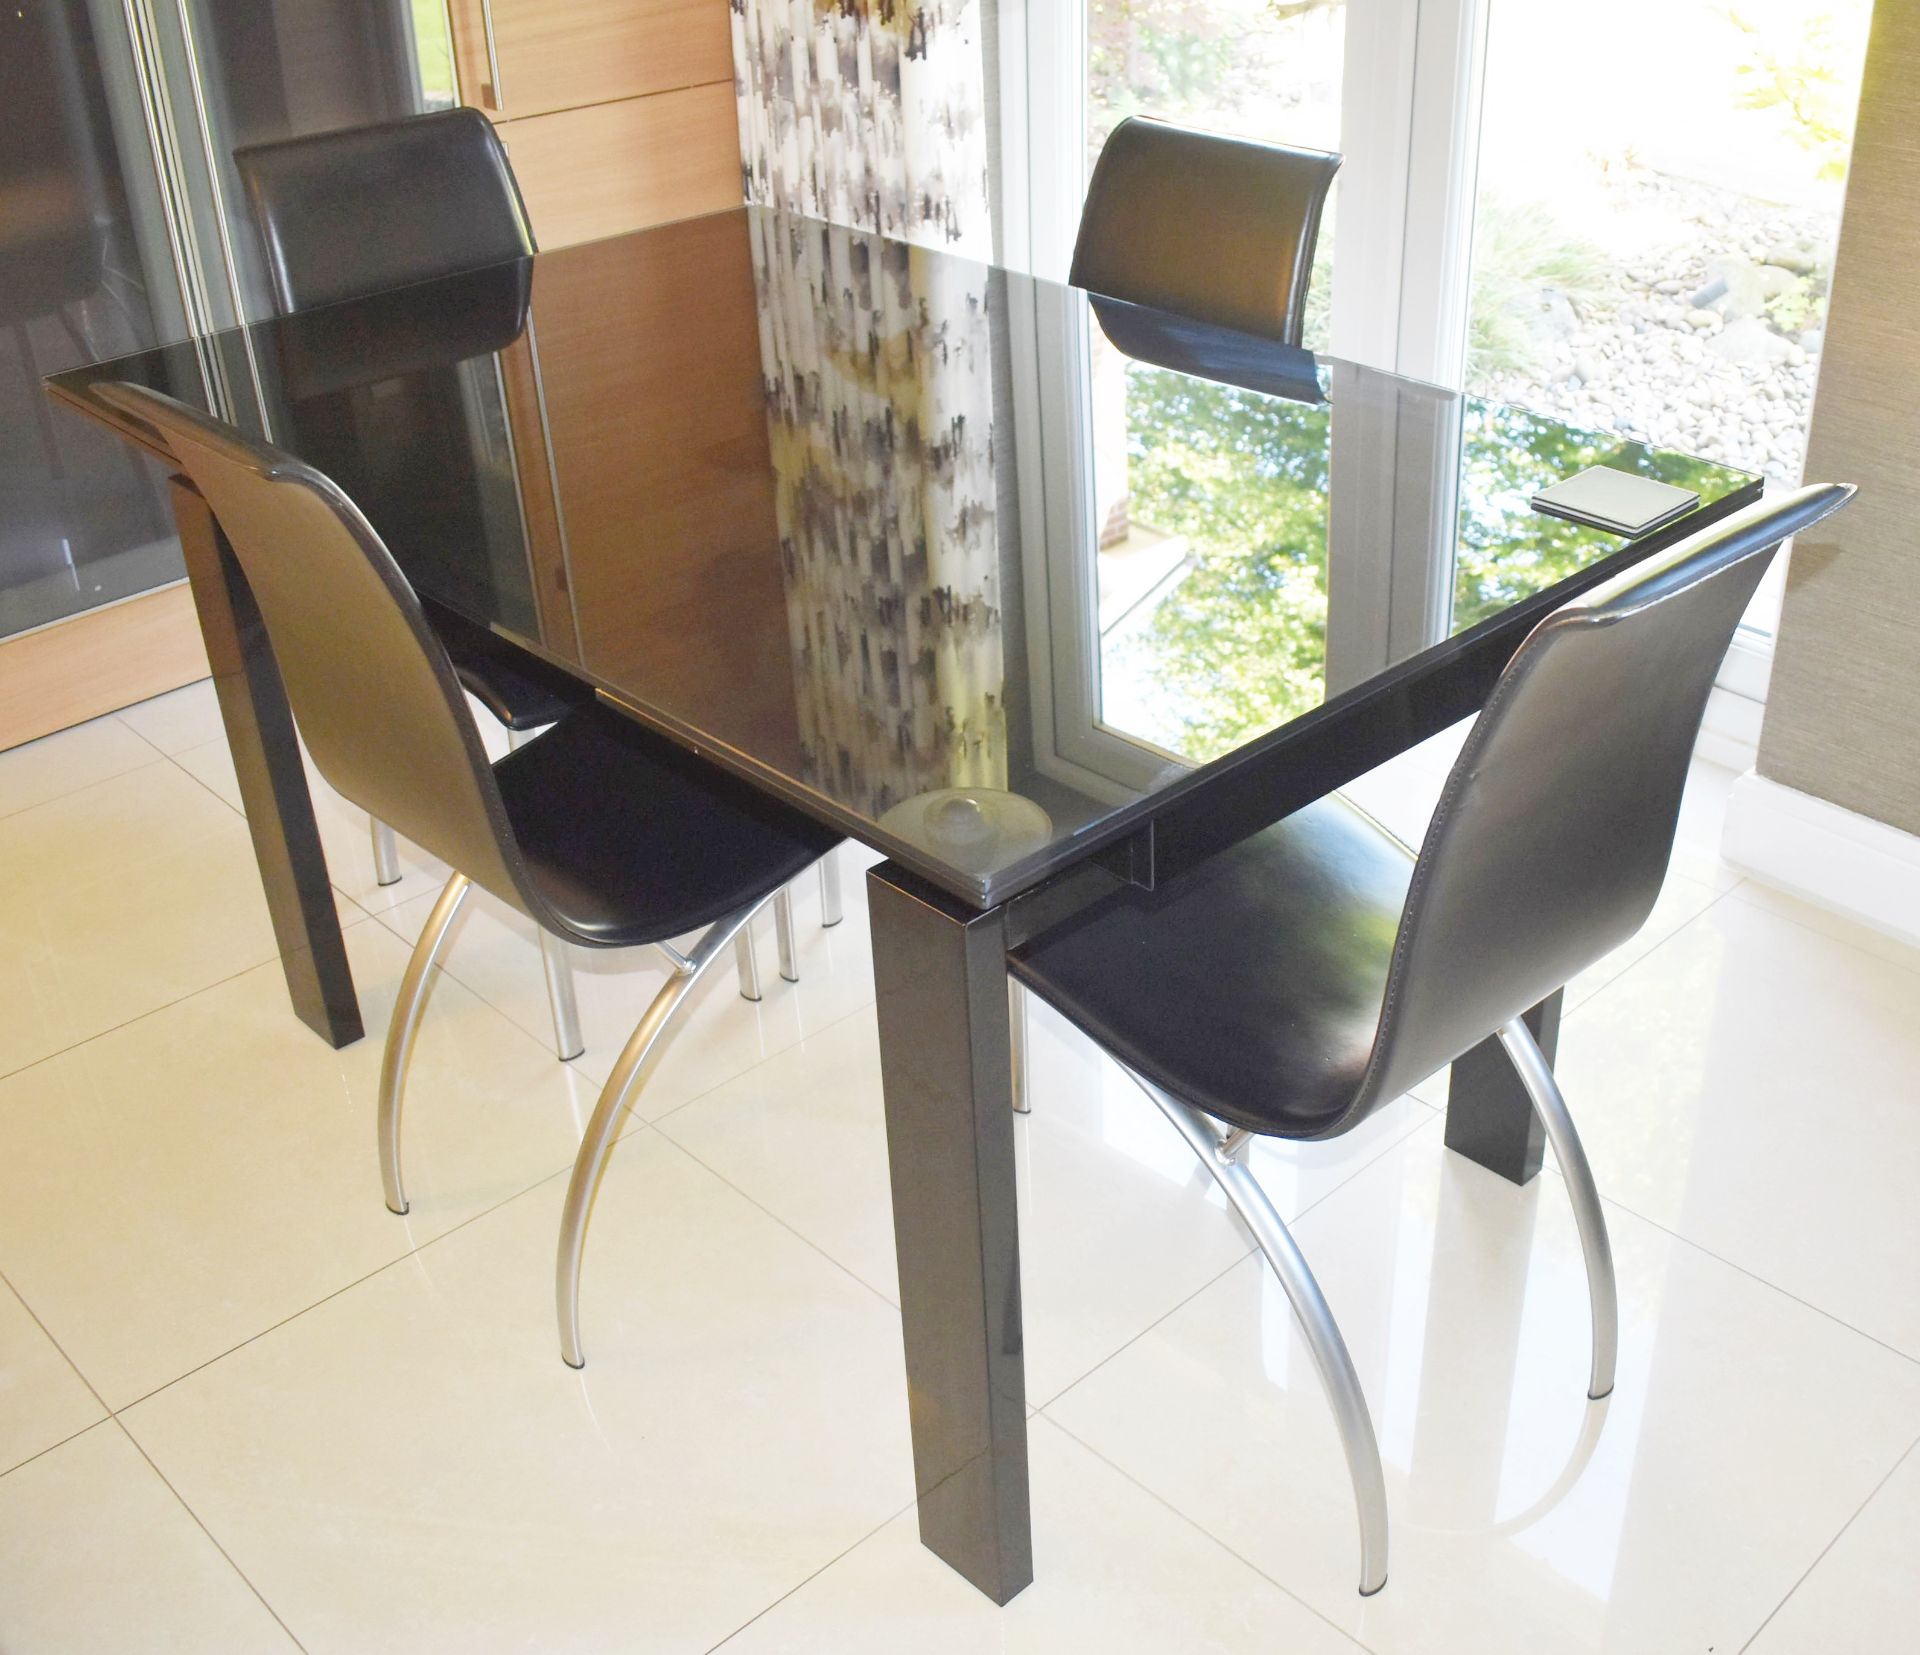 1 x Casabella Tempered Black Glass Extending Dining Table With Four Chairs - Stunning Contemporary